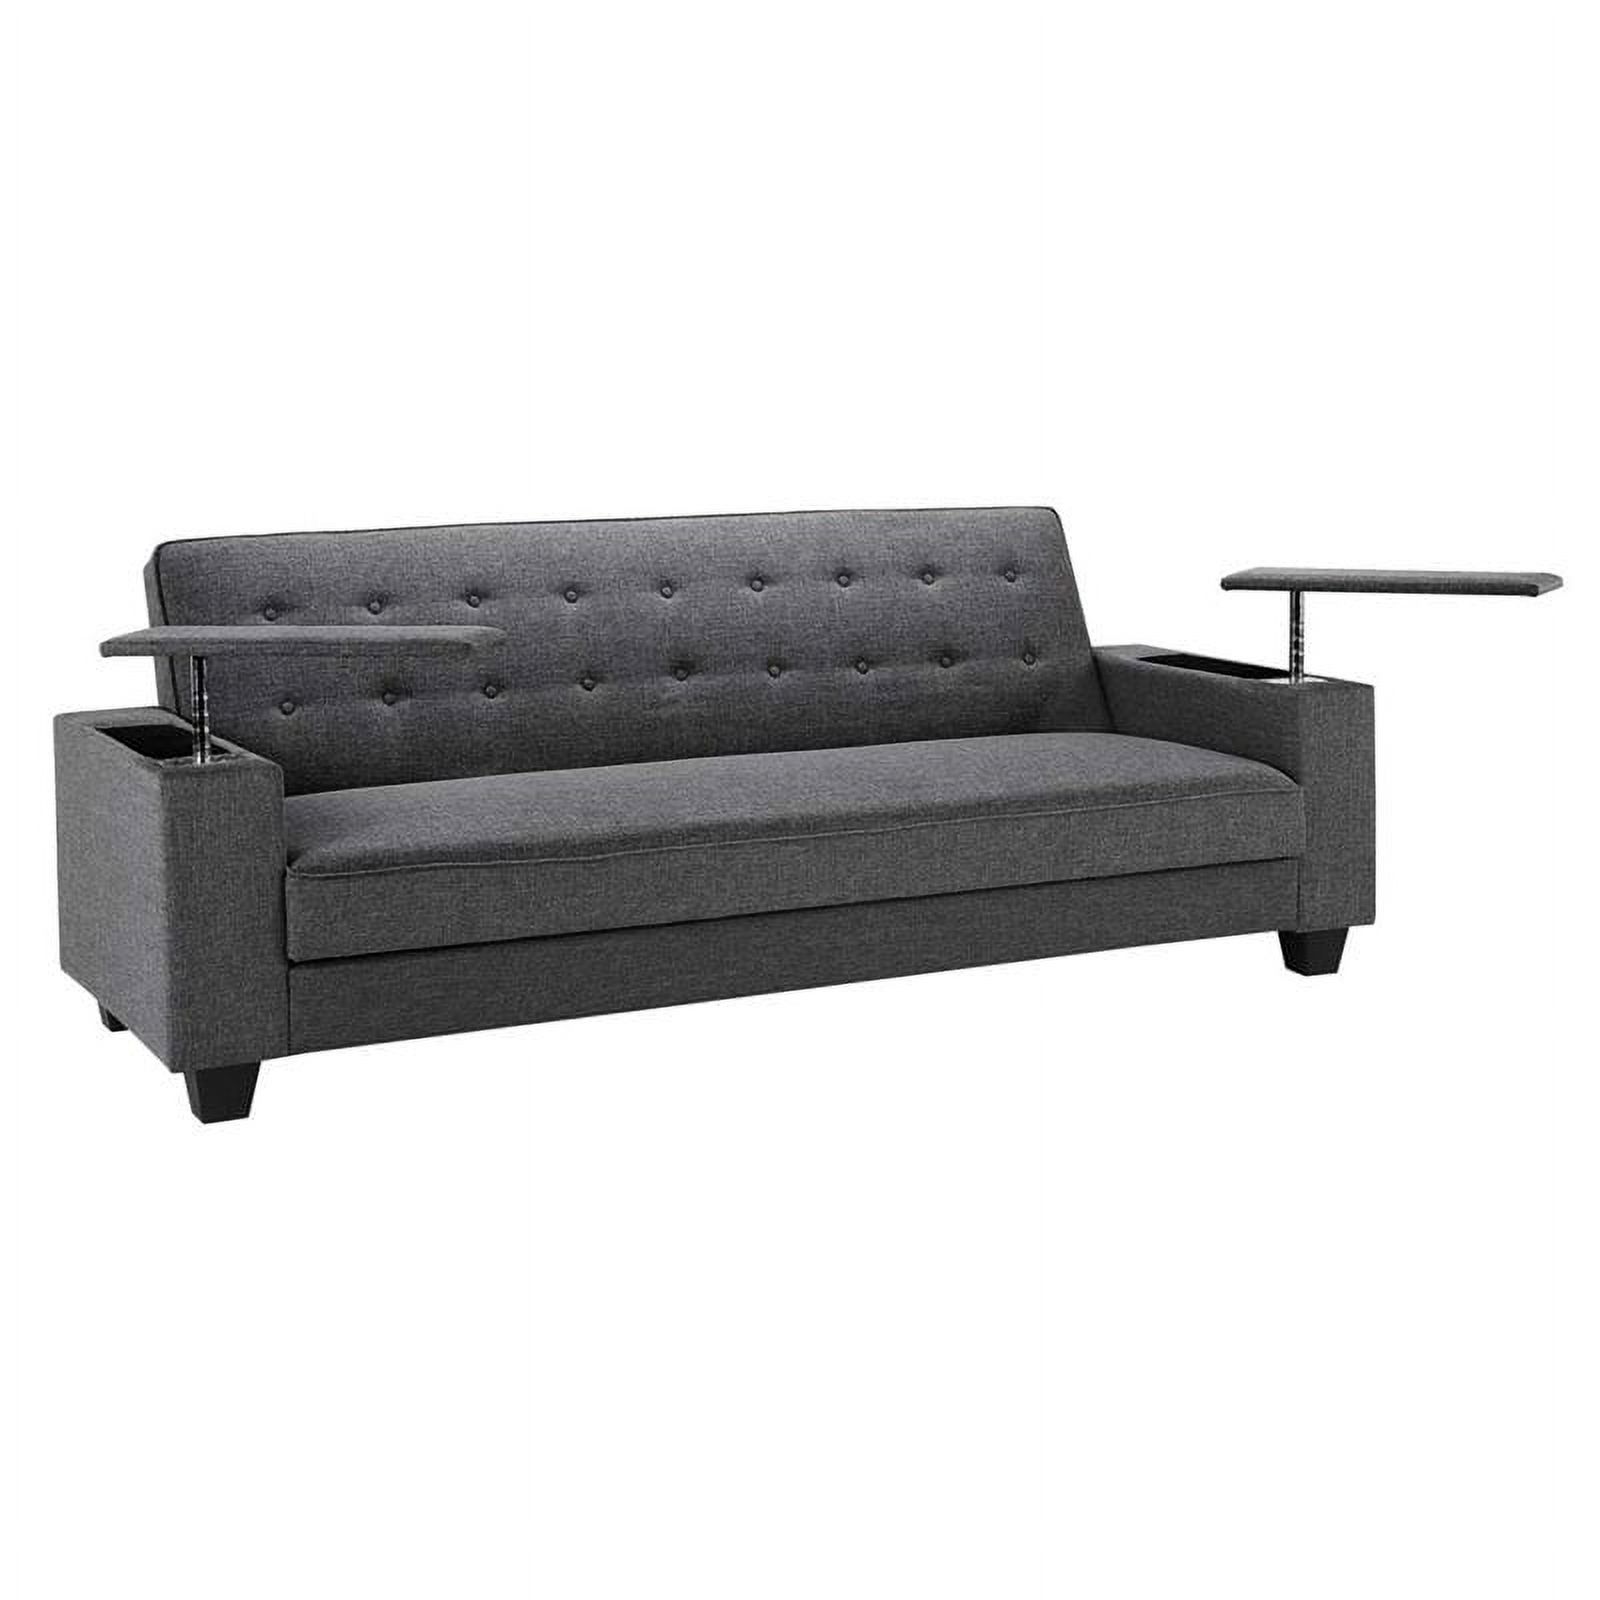 DHP Union Laptop Tray Convertible Sofa in Gray - image 3 of 10